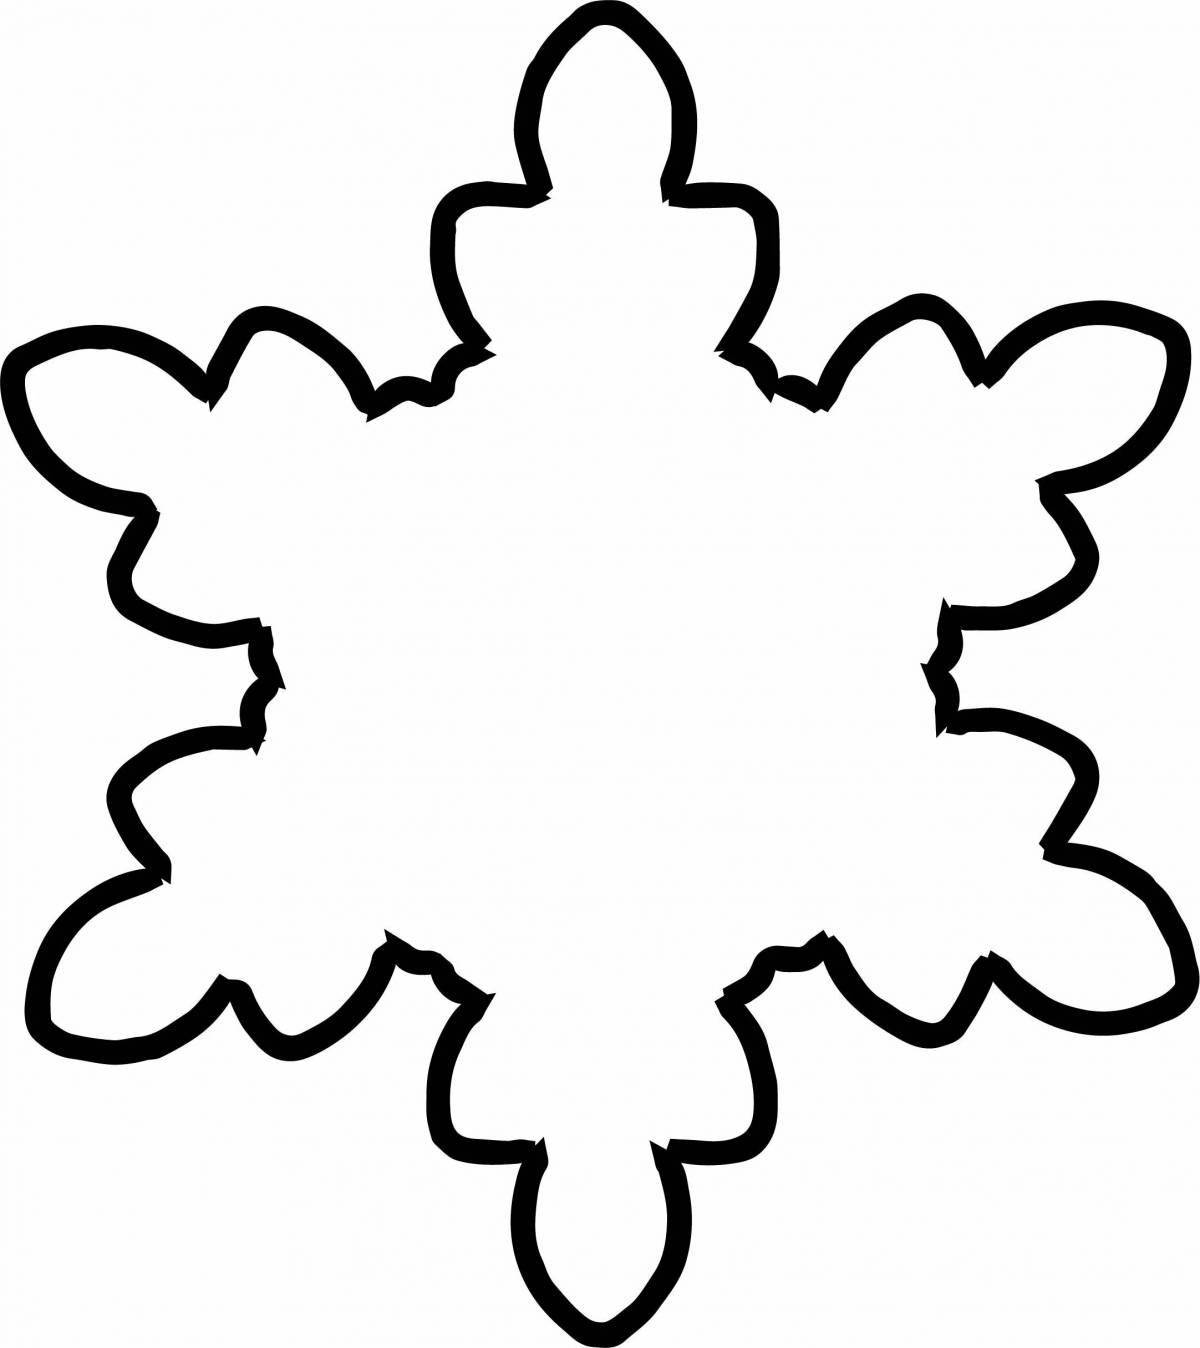 Coloring bright snowflake for children 2-3 years old